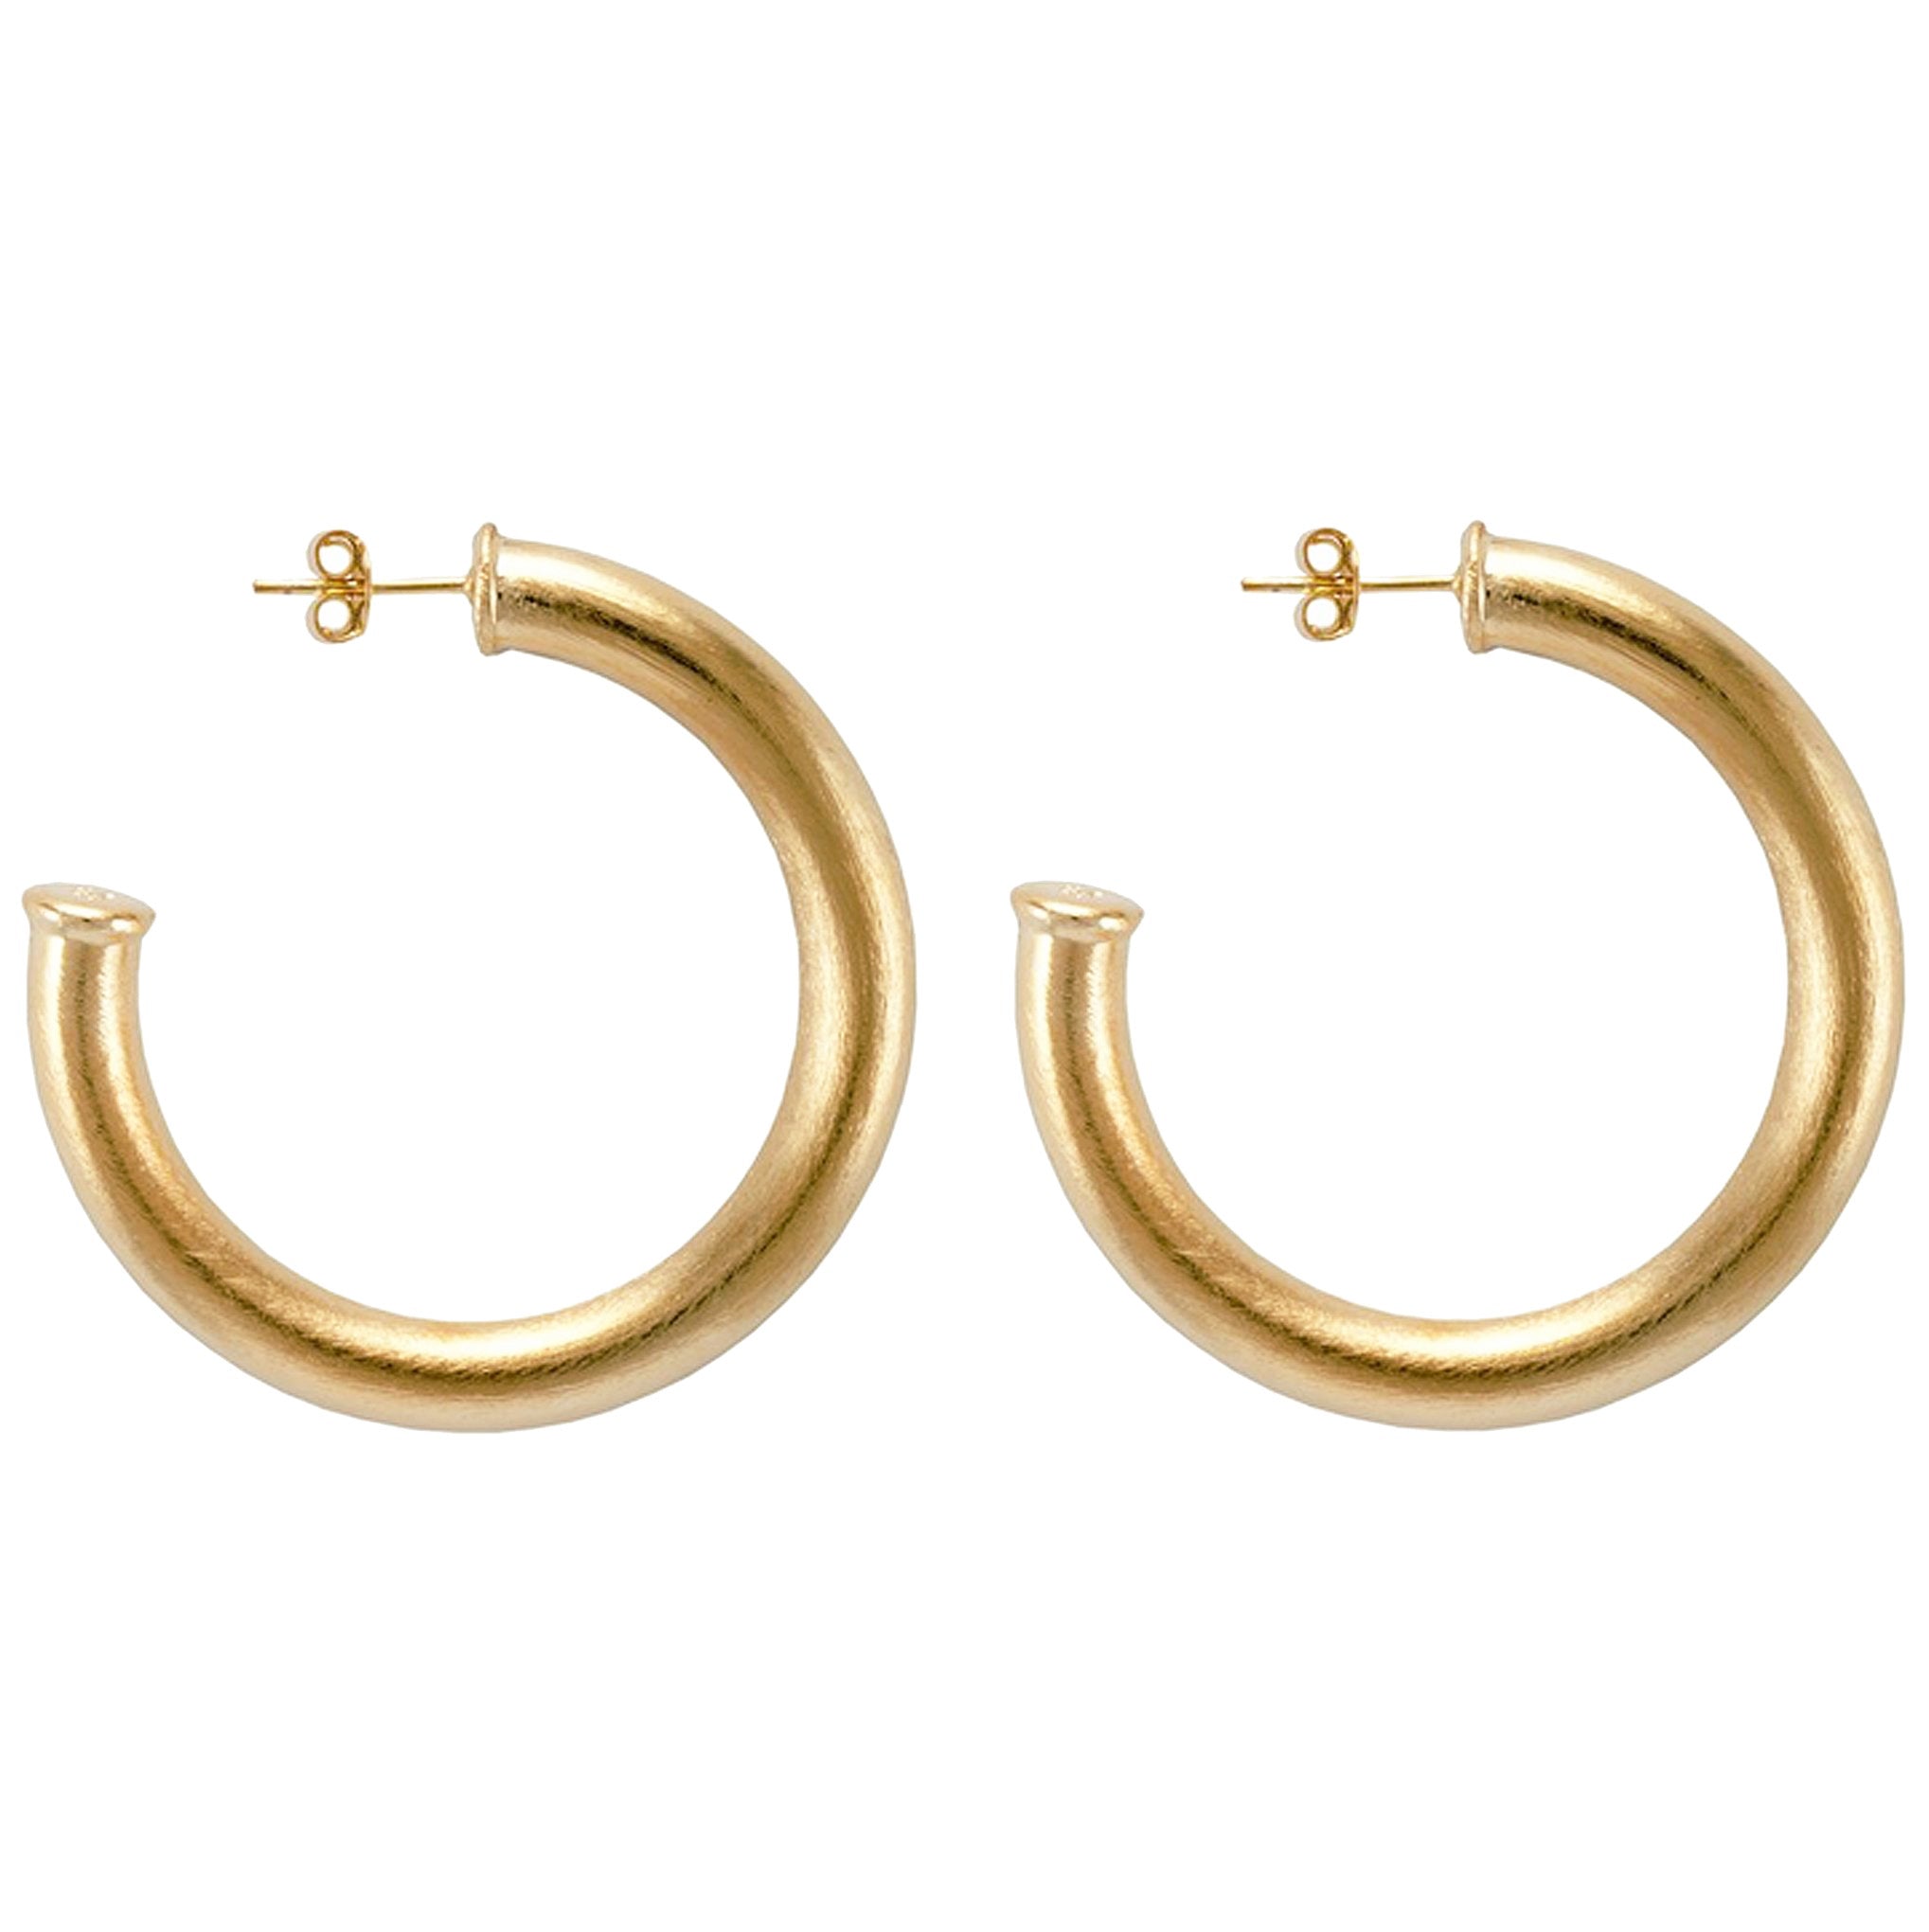 Sheila Fajl Thick Chantal Hoop Earrings in Brushed Champagne Plated